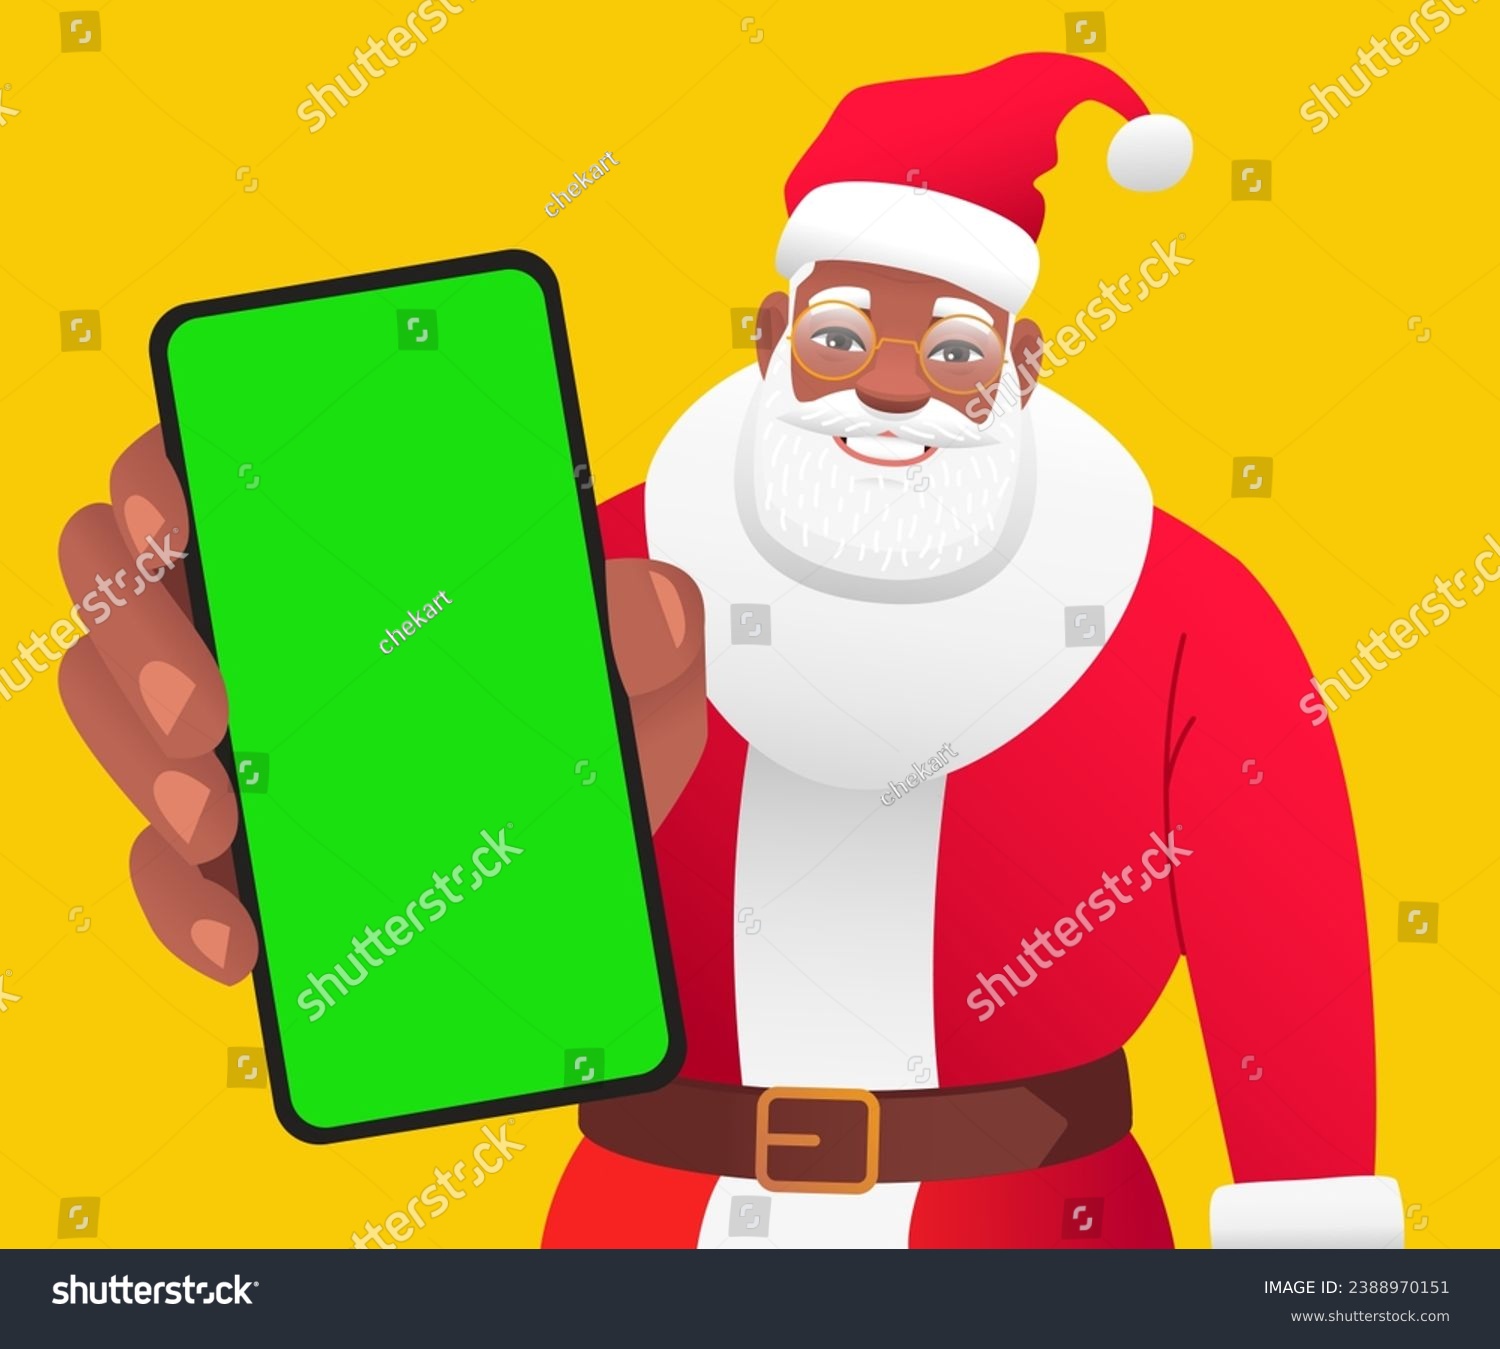 SVG of Black gray-haired Santa is holding a phone in his hand. African Santa Claus shows a close-up of a green phone screen to the camera. Place to advertise a mobile app. Vector illustration. svg